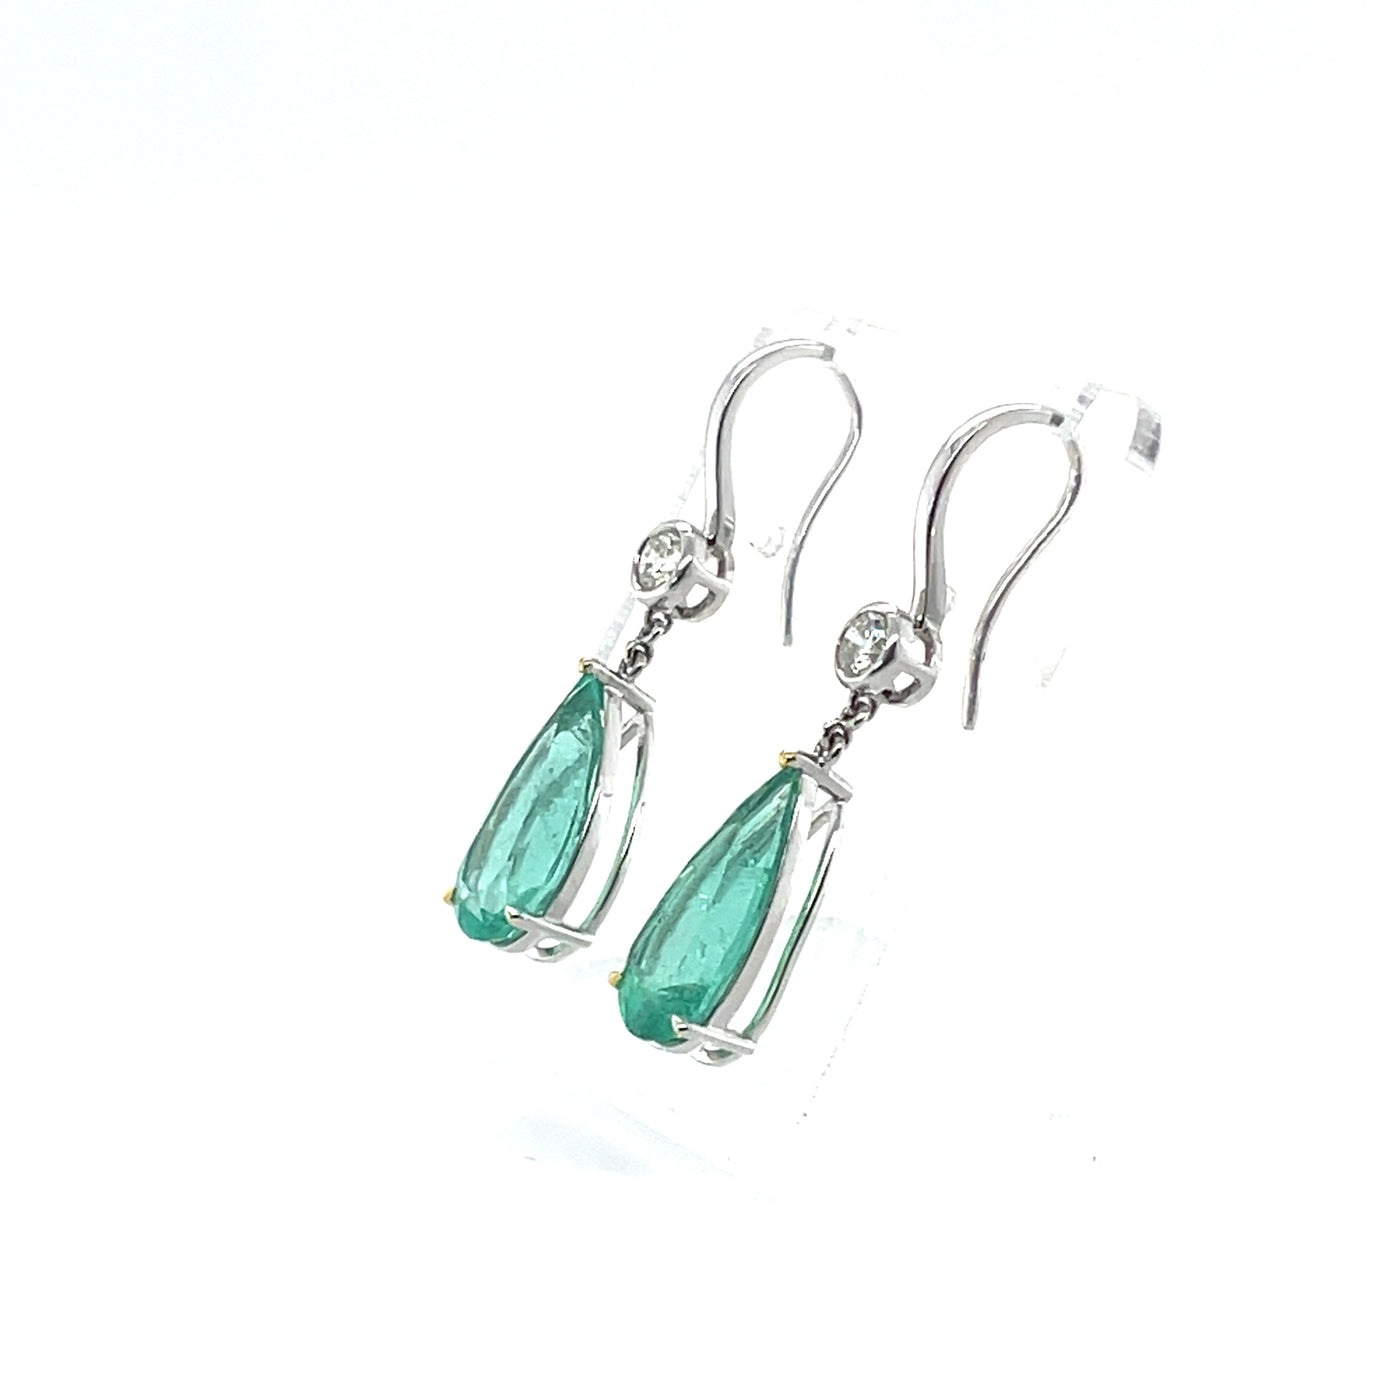 18CT white gold colombian emerald and diamond earring